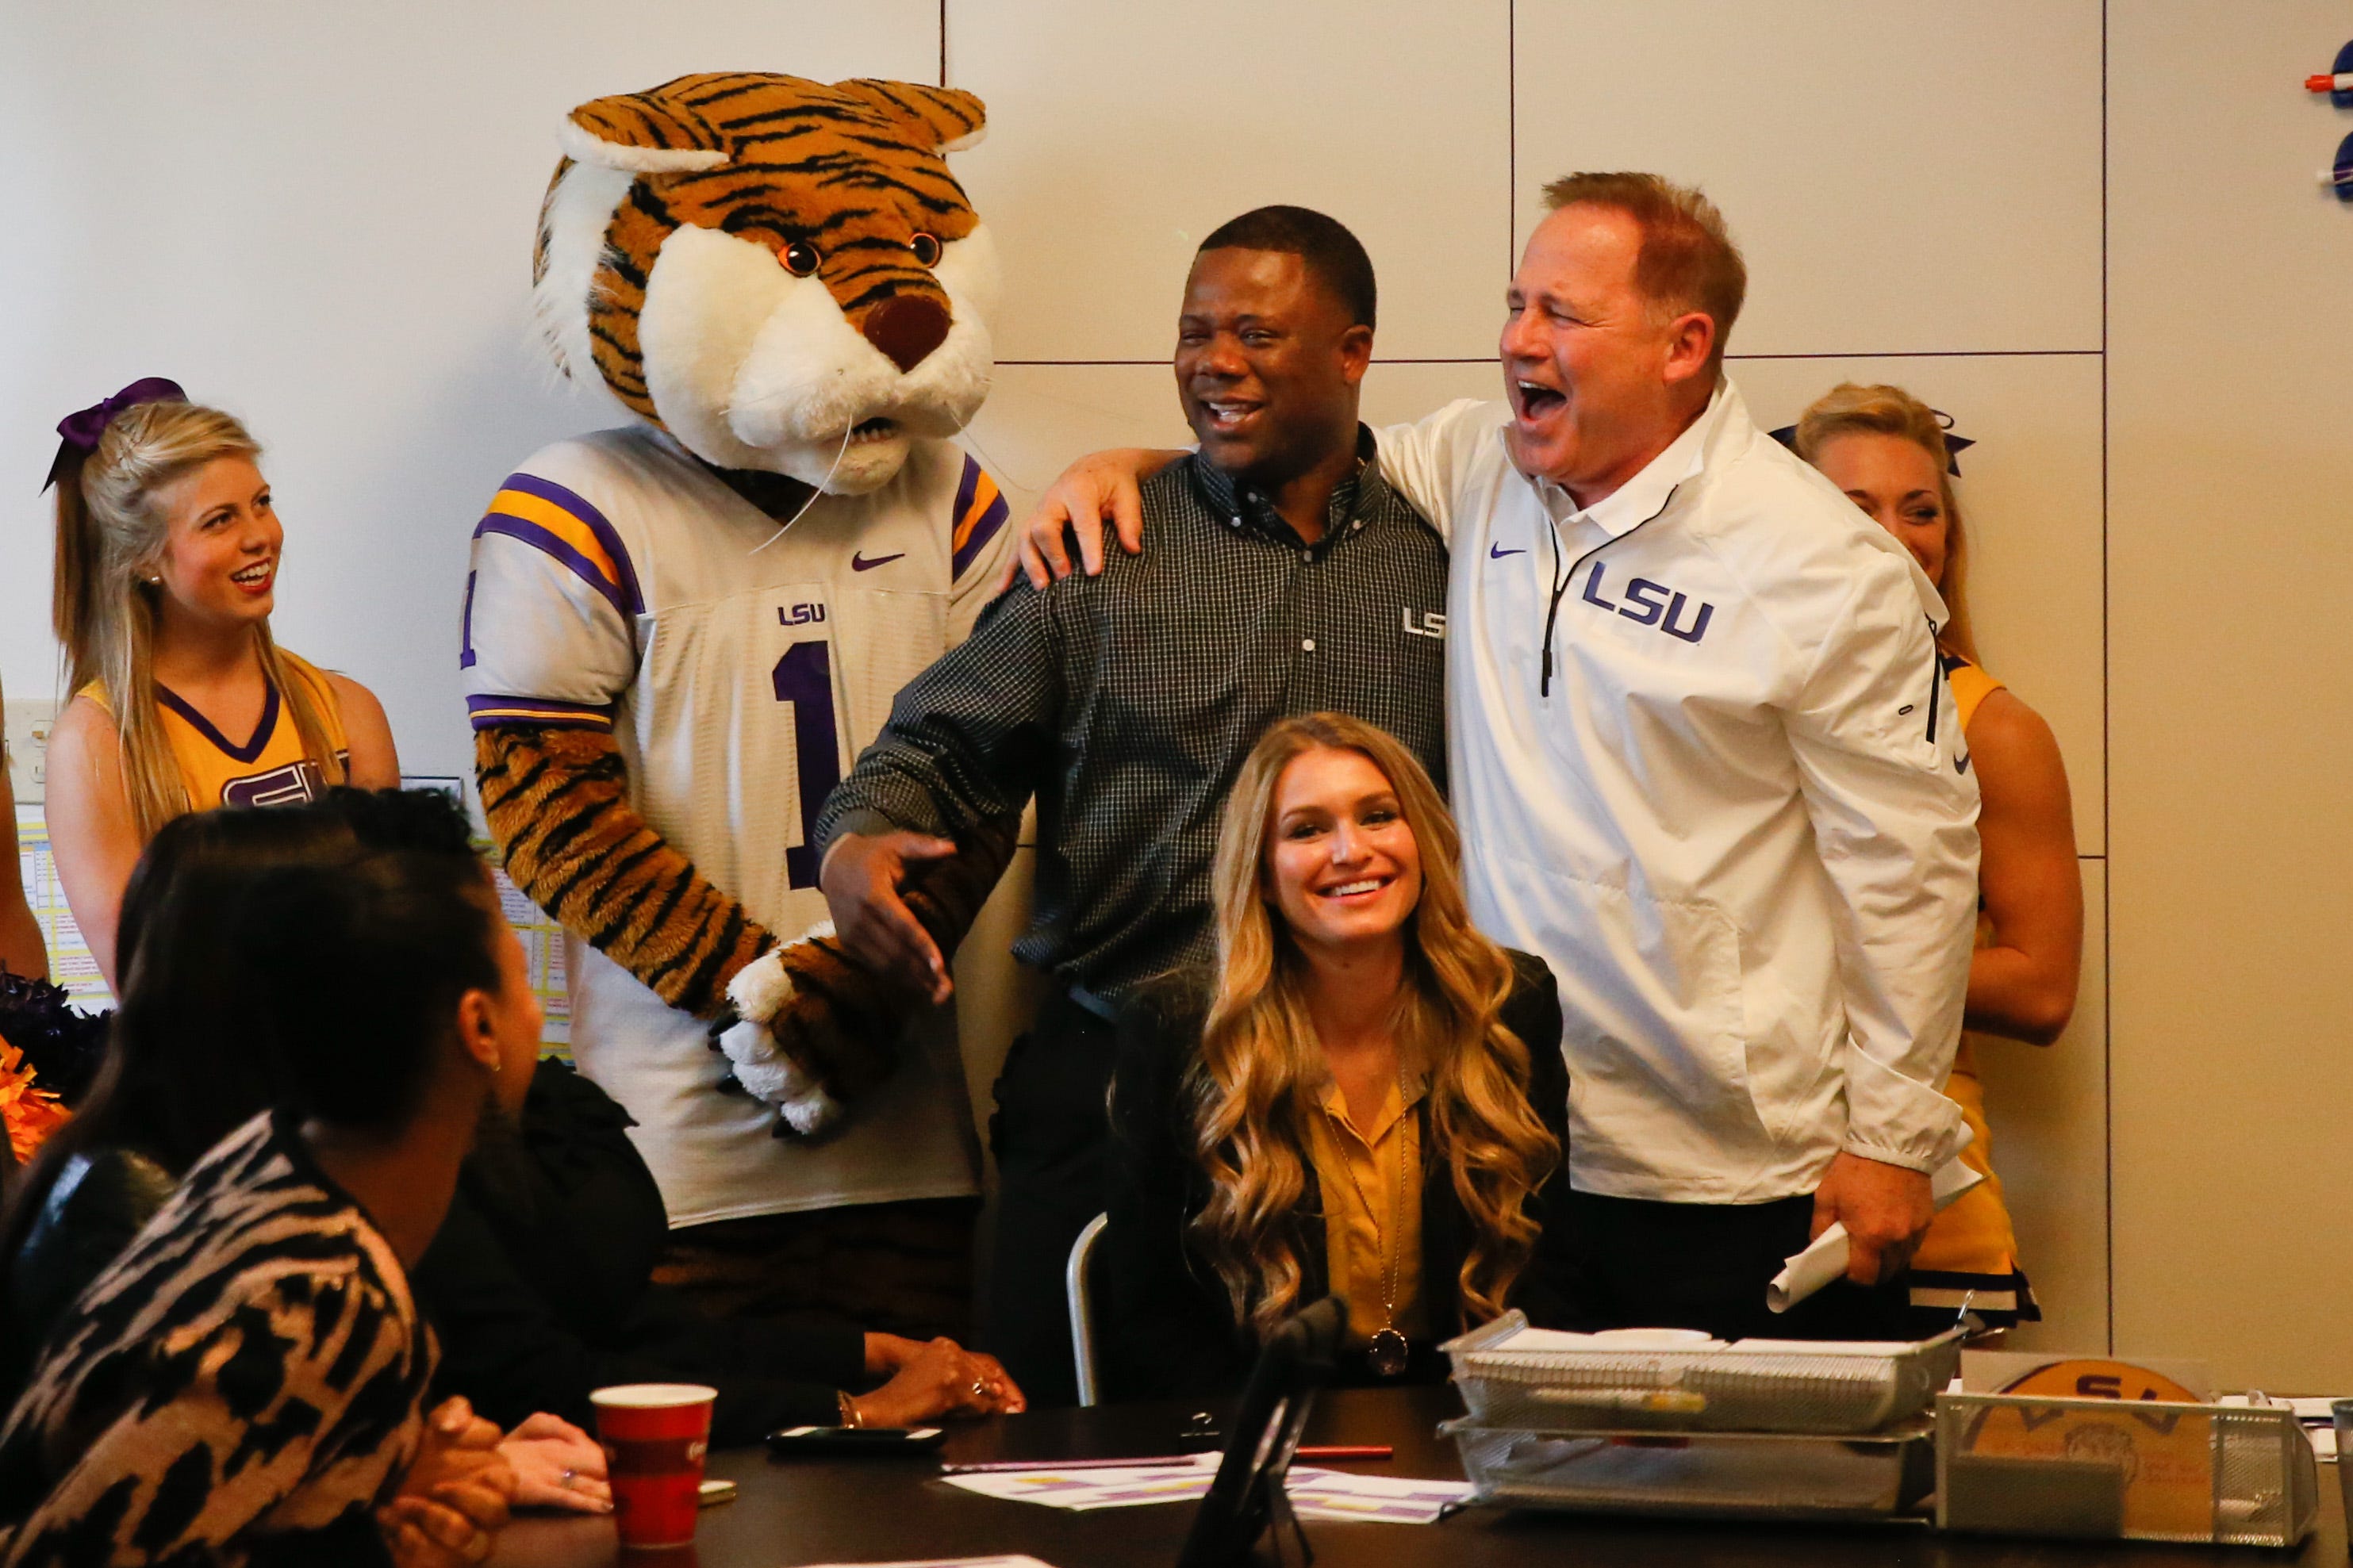 LSU's then-head football coach Les Miles alongside Tigers recruitment coordinator and running back coach Frank Wilson (middle).